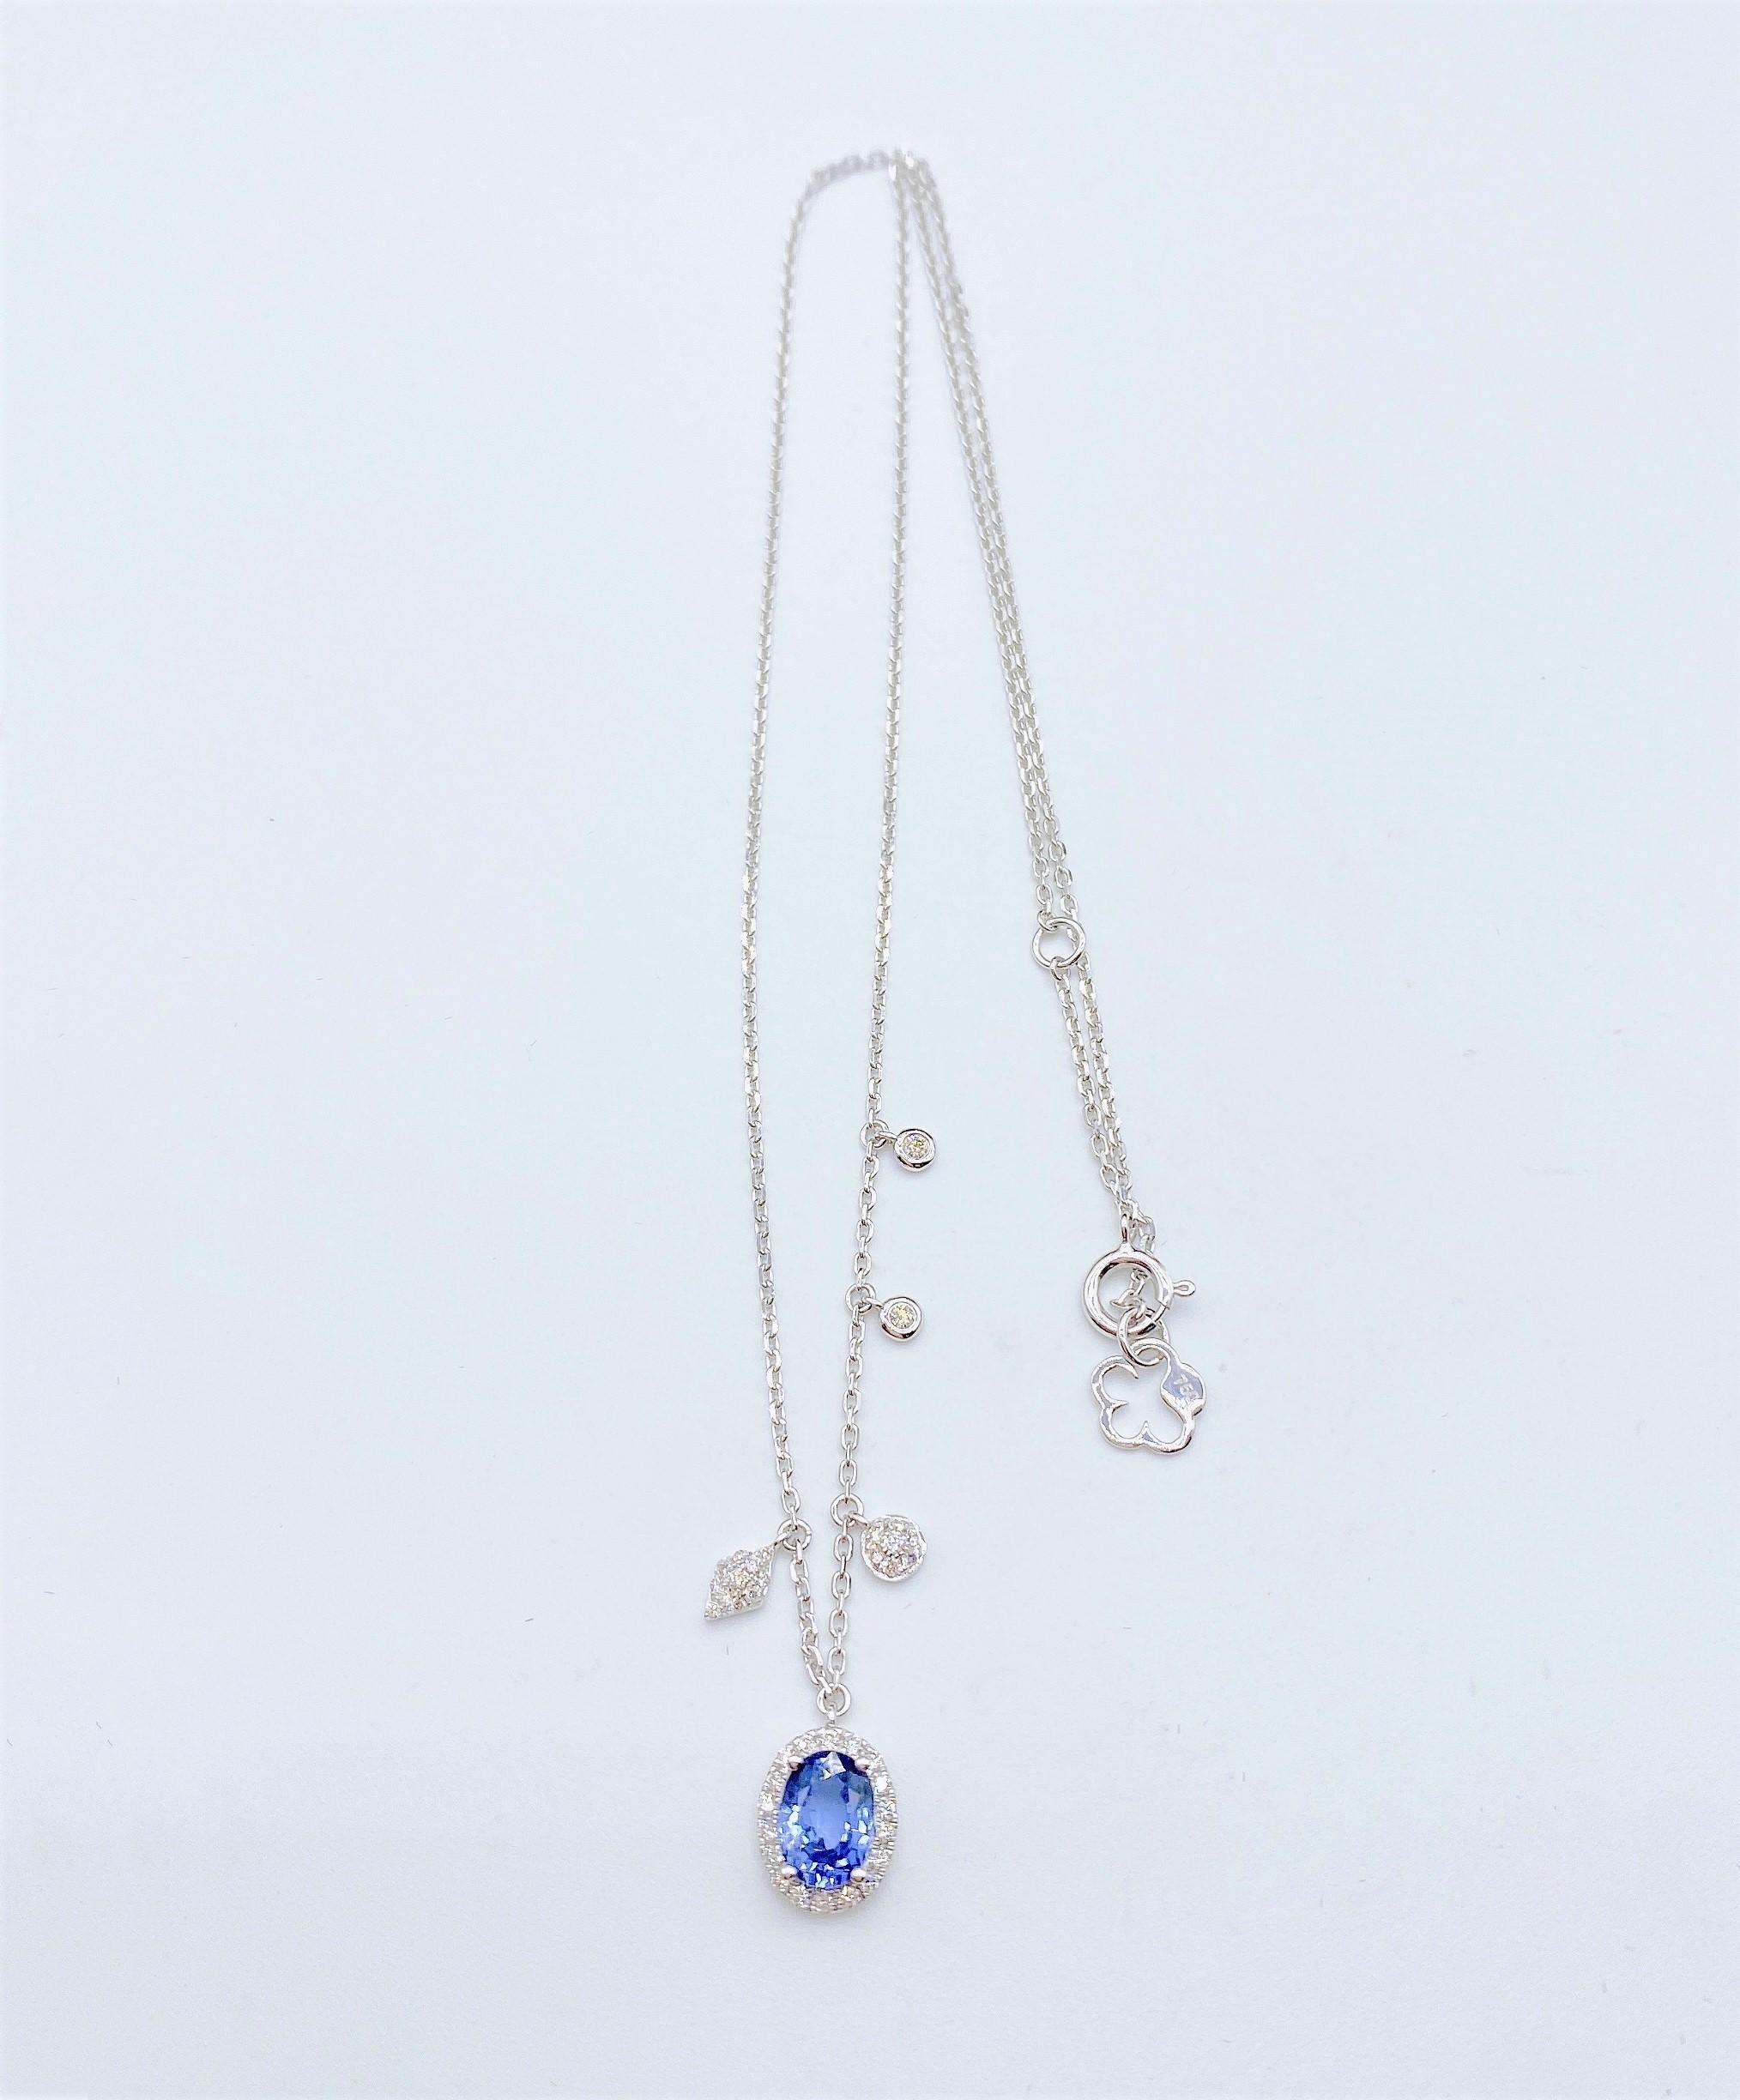 Mixed Cut $4, 119 Stunning 18Kt Gold Gorgeous Blue Sapphire and Diamond Pendant Necklace For Sale